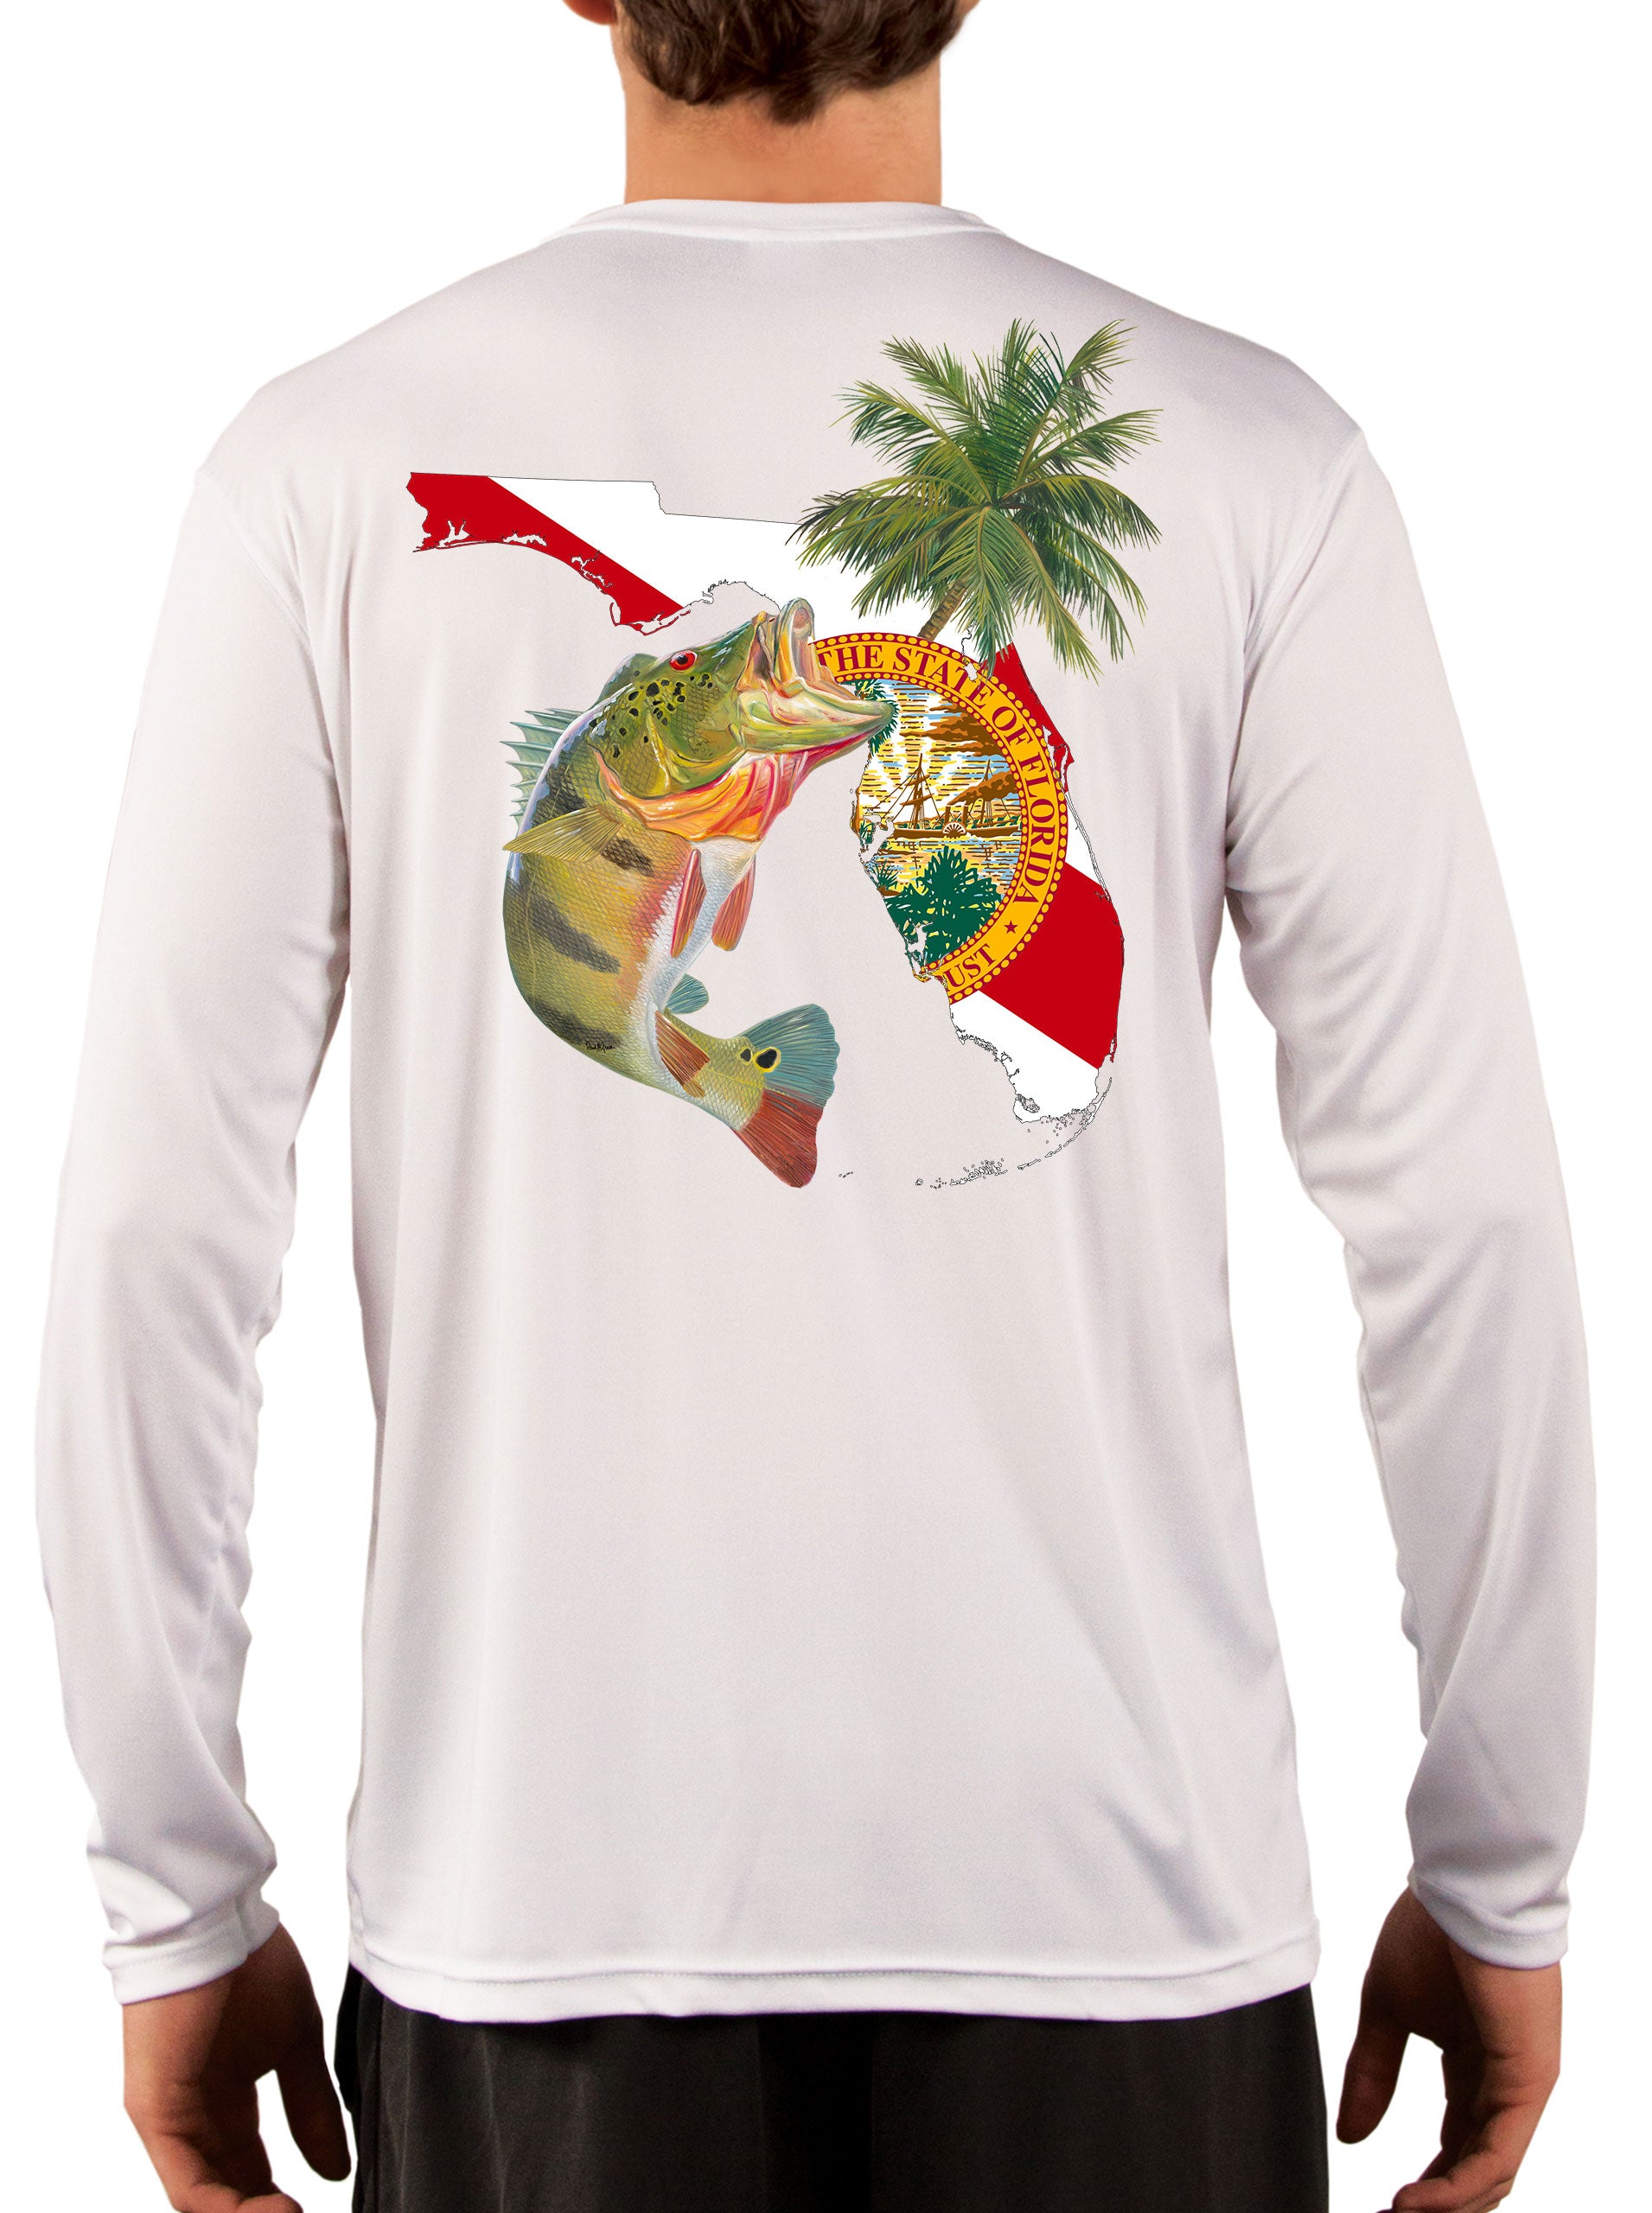 [New Artwork] Peacock Bass Florida Map Fishing Shirts for Men with Florida State Flag Sleeve Small / Yellow